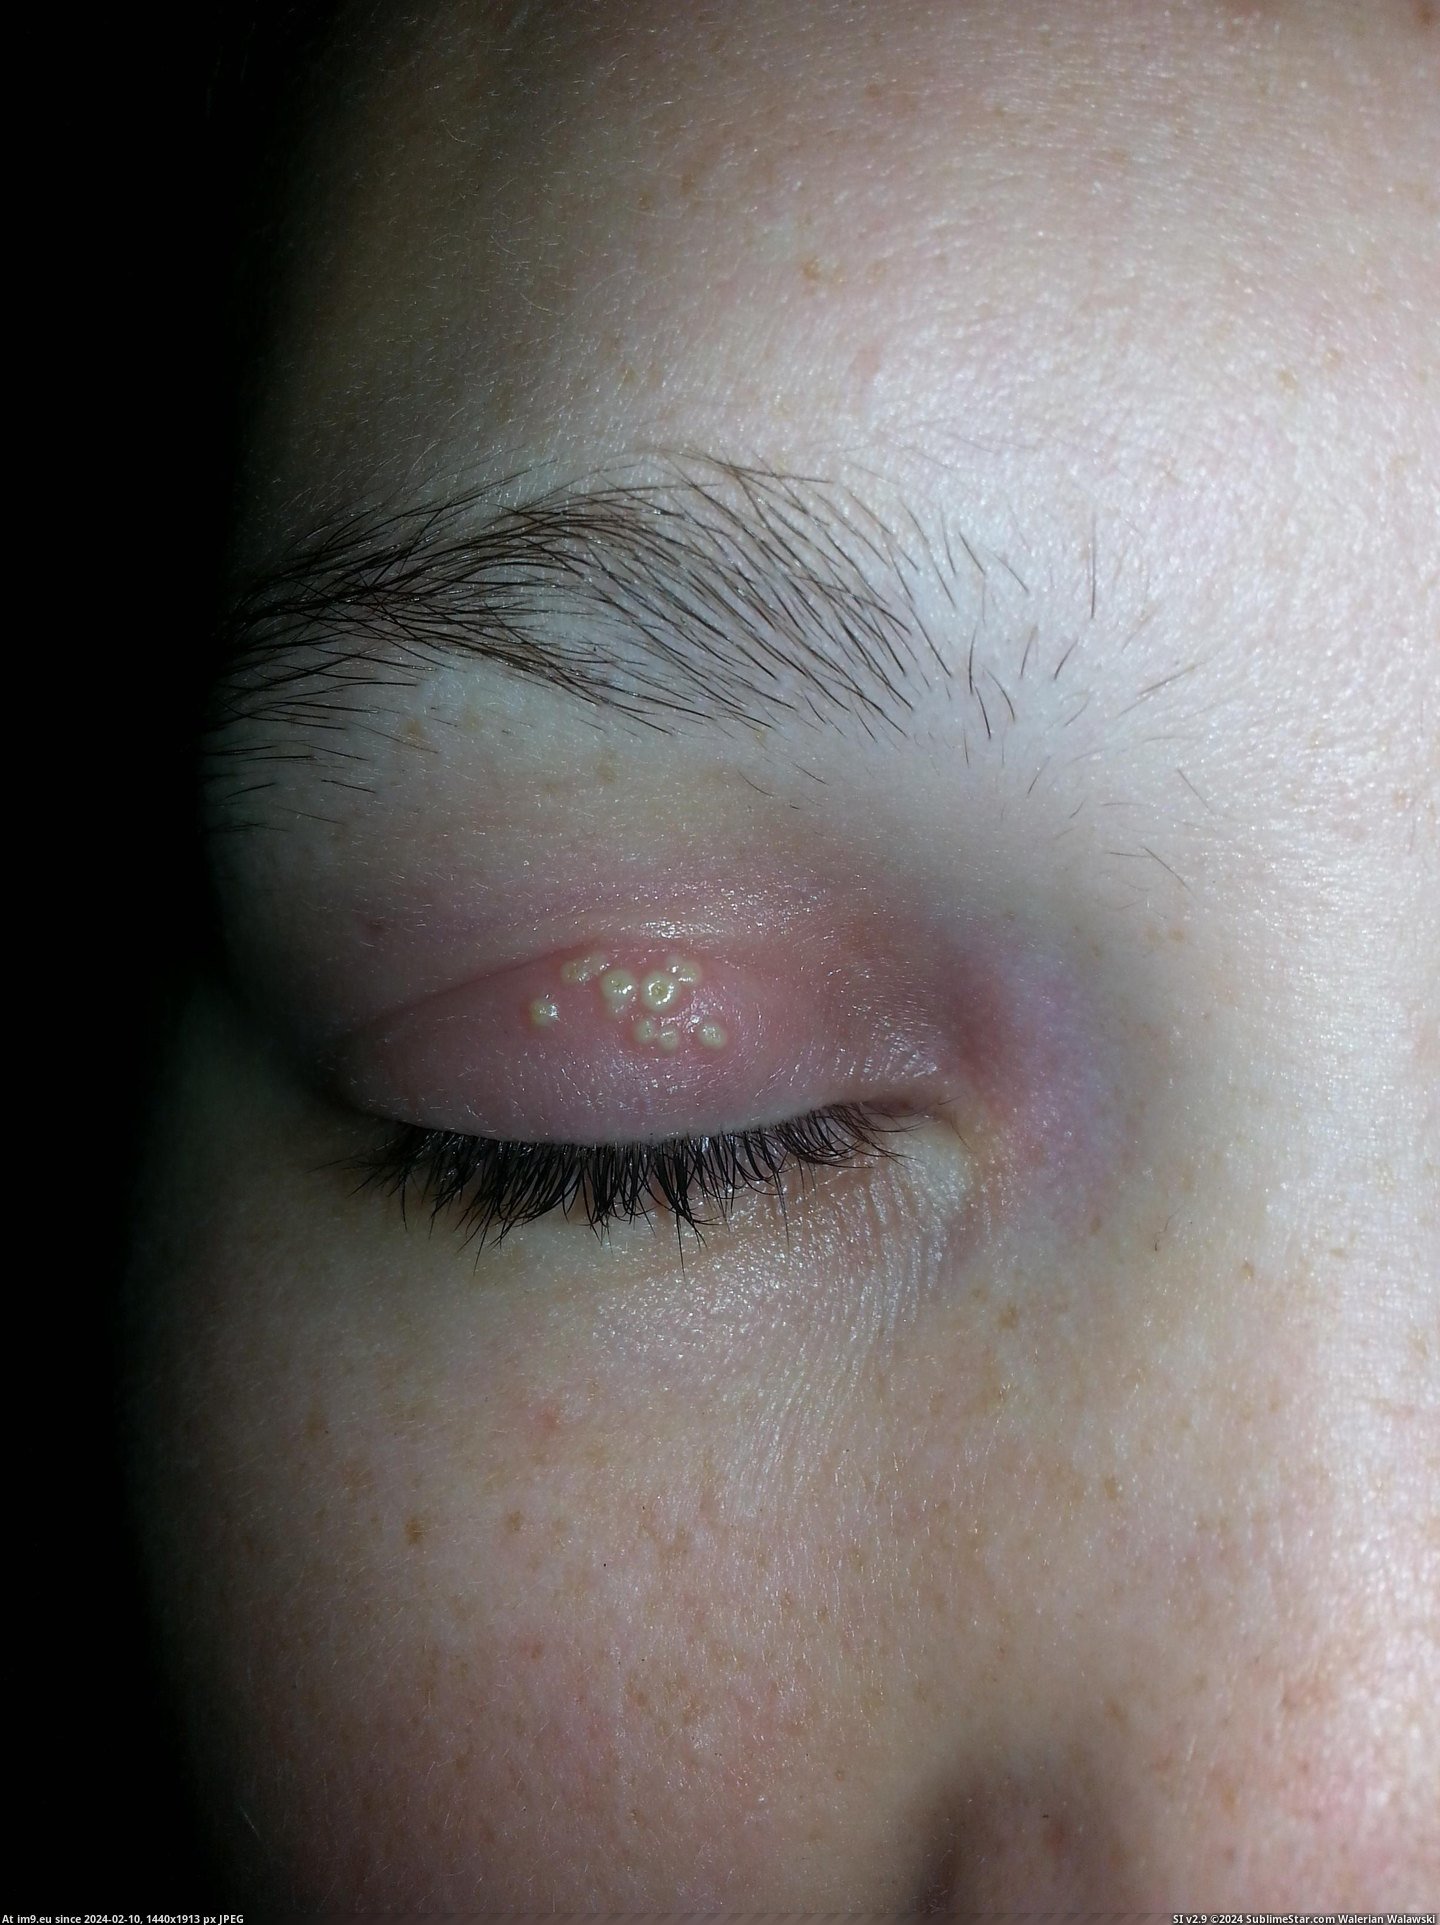 #Wtf #Woke #Eyelid #Wife [Wtf] My wife woke up with this on her eyelid. Wtf is it? Pic. (Image of album My r/WTF favs))